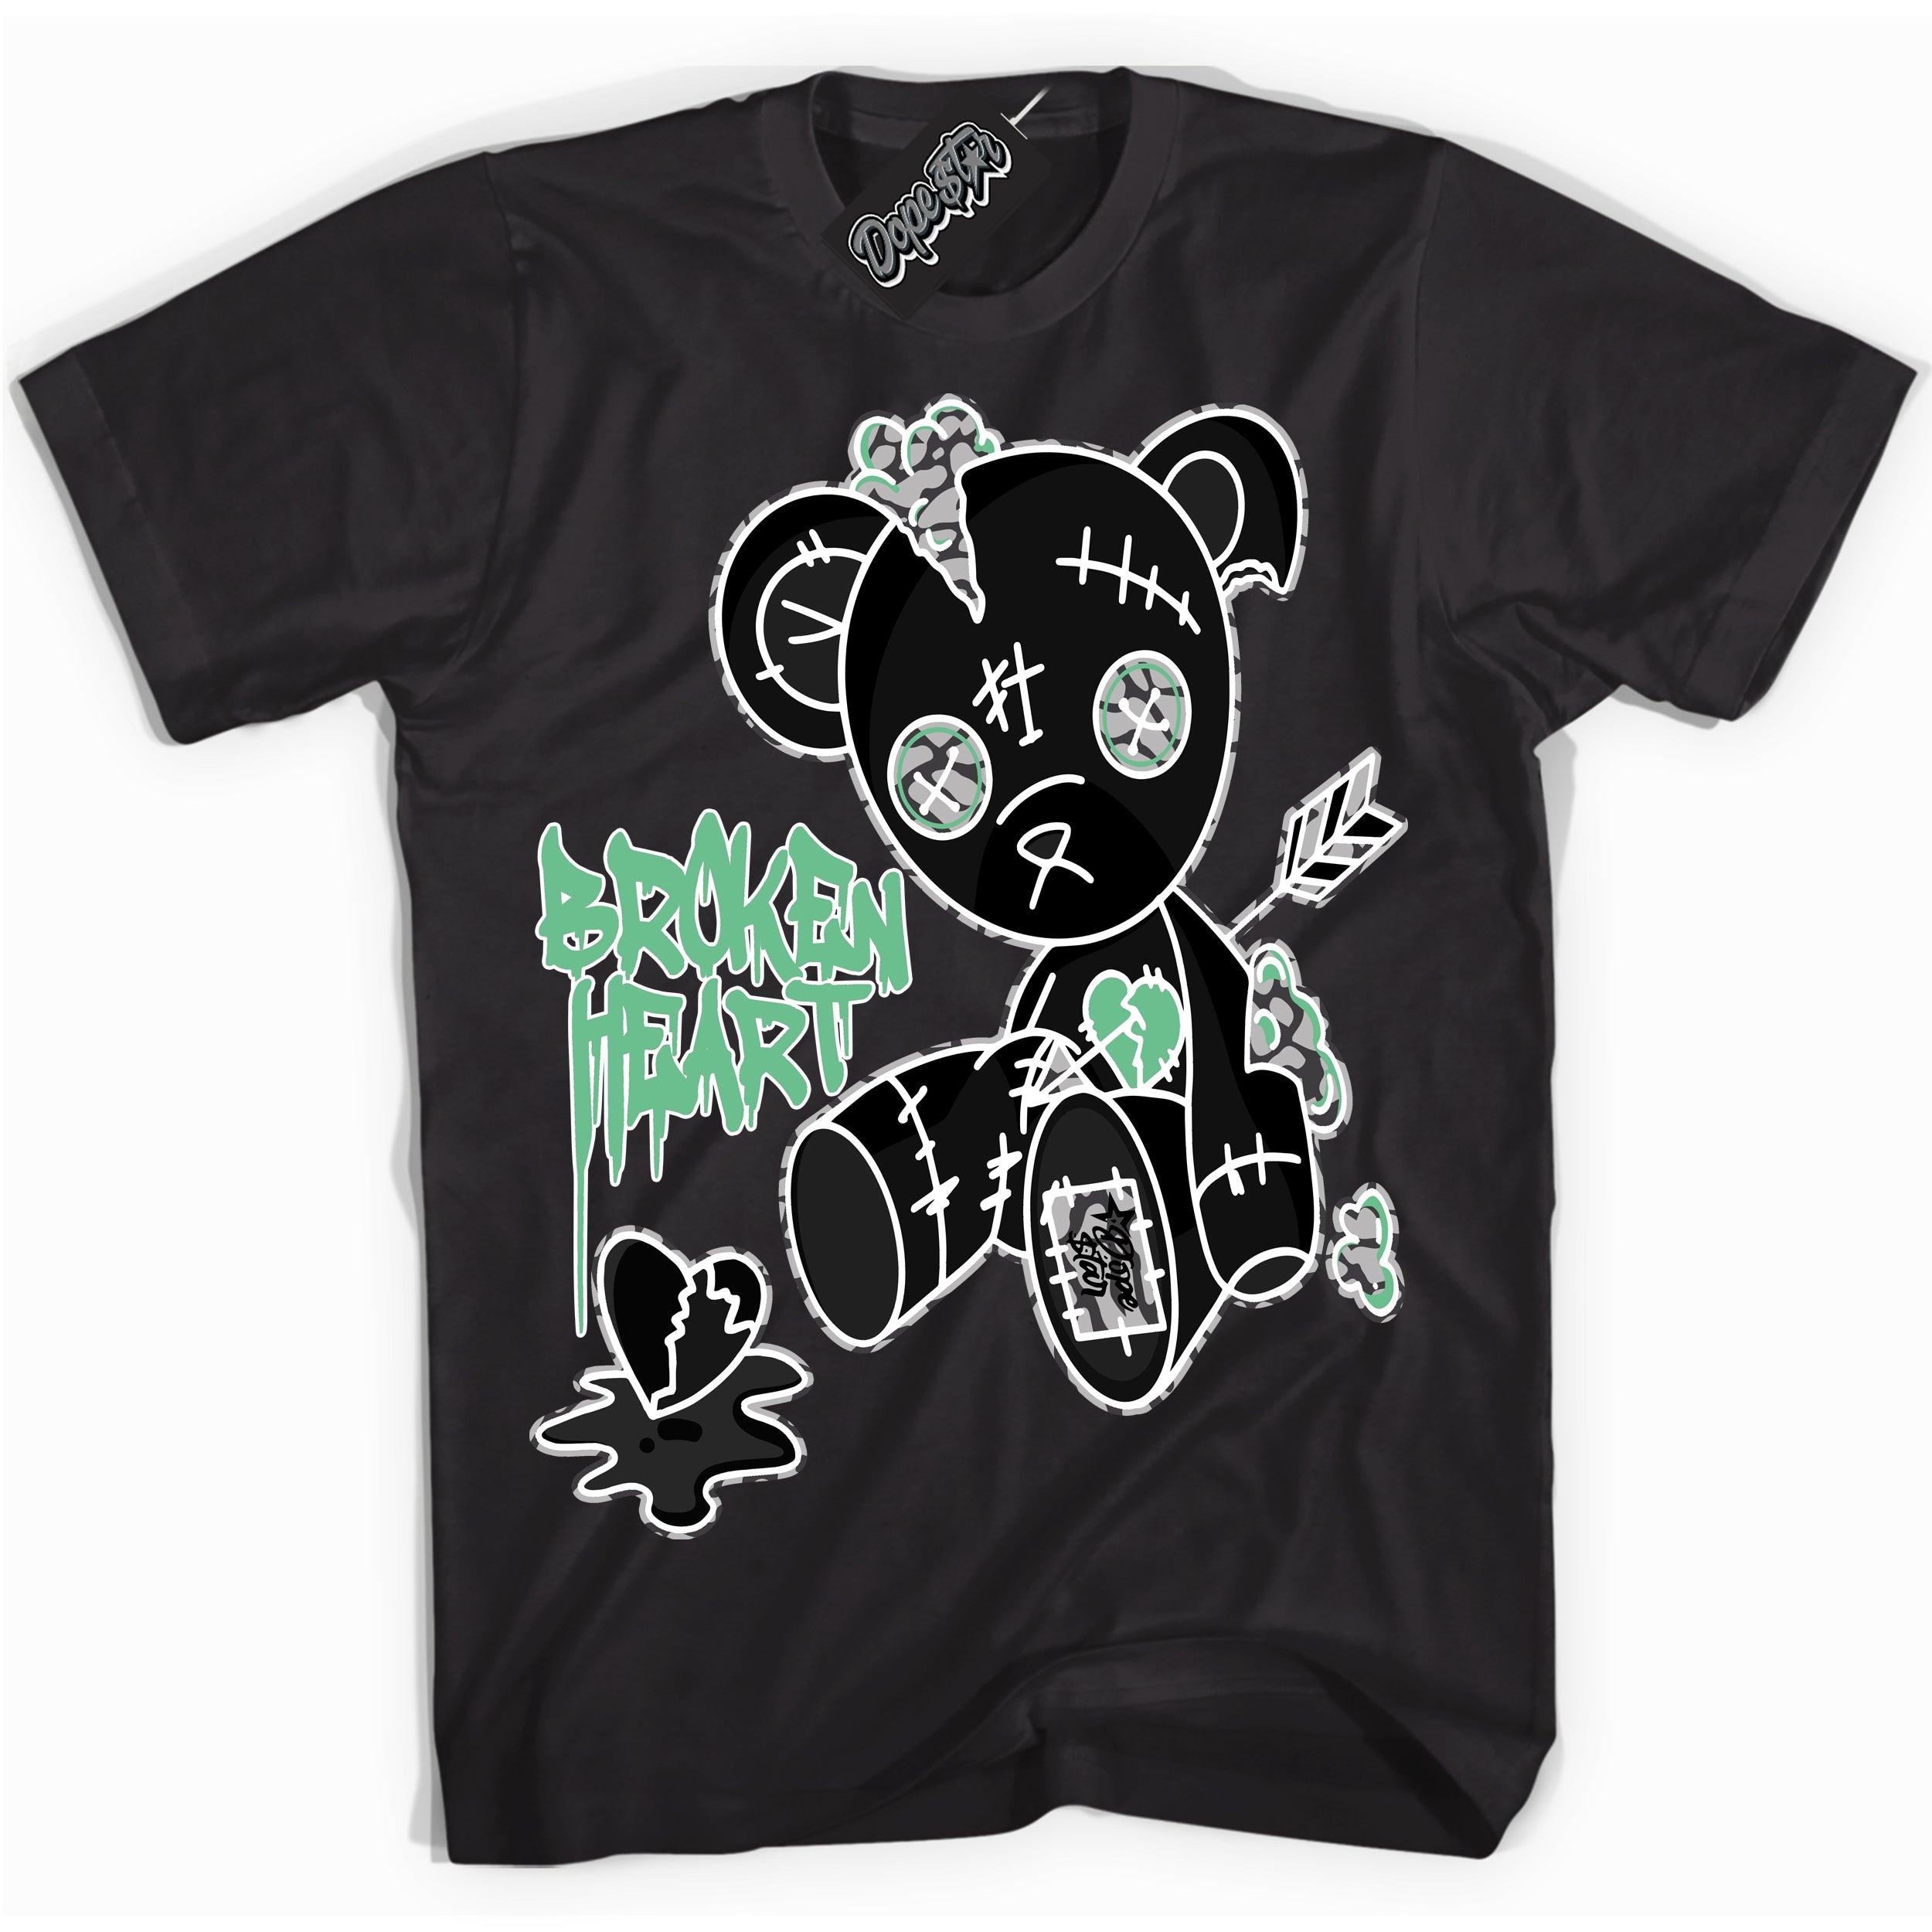 Cool Black graphic tee with “ Broken Heart Bear ” design, that perfectly matches Green Glow 3s sneakers 